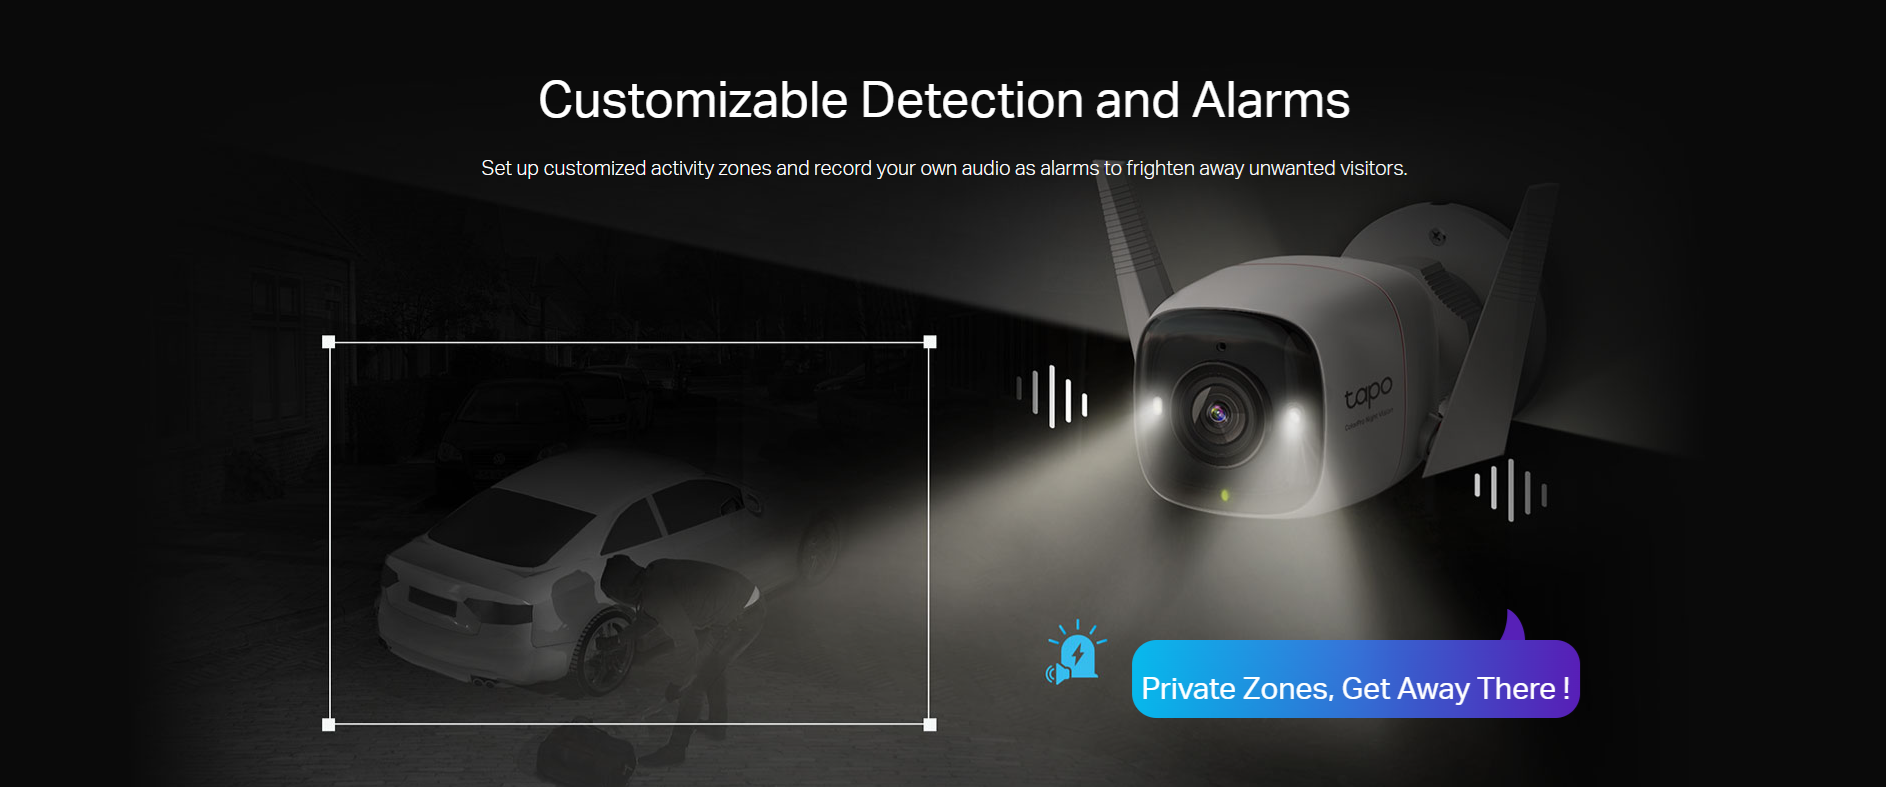 Customizable Detection and Alarms
Set up customized activity zones and record your own audio as alarms to frighten away unwanted visitors.